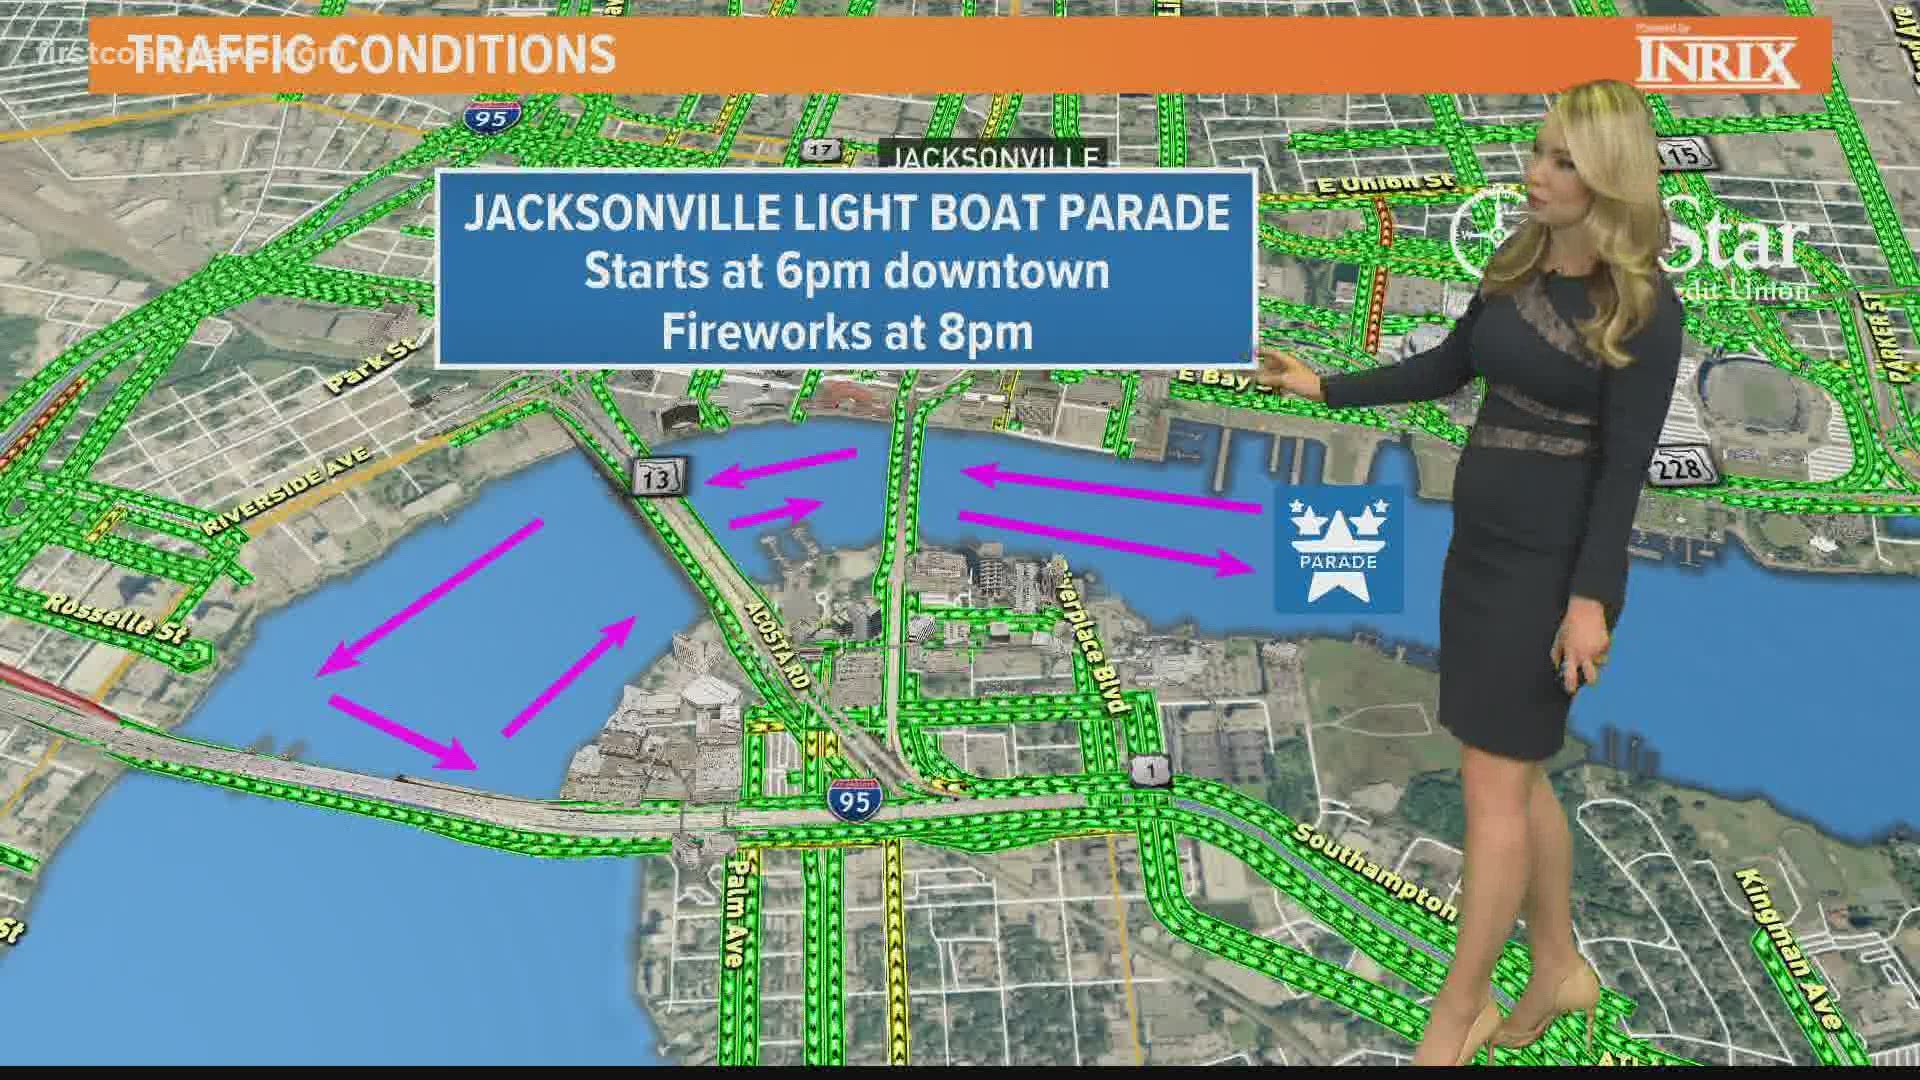 The parade starts in Downtown Jacksonville at 6 p.m. Saturday, with plenty of spots available to watch -- just remember to practice social distancing!